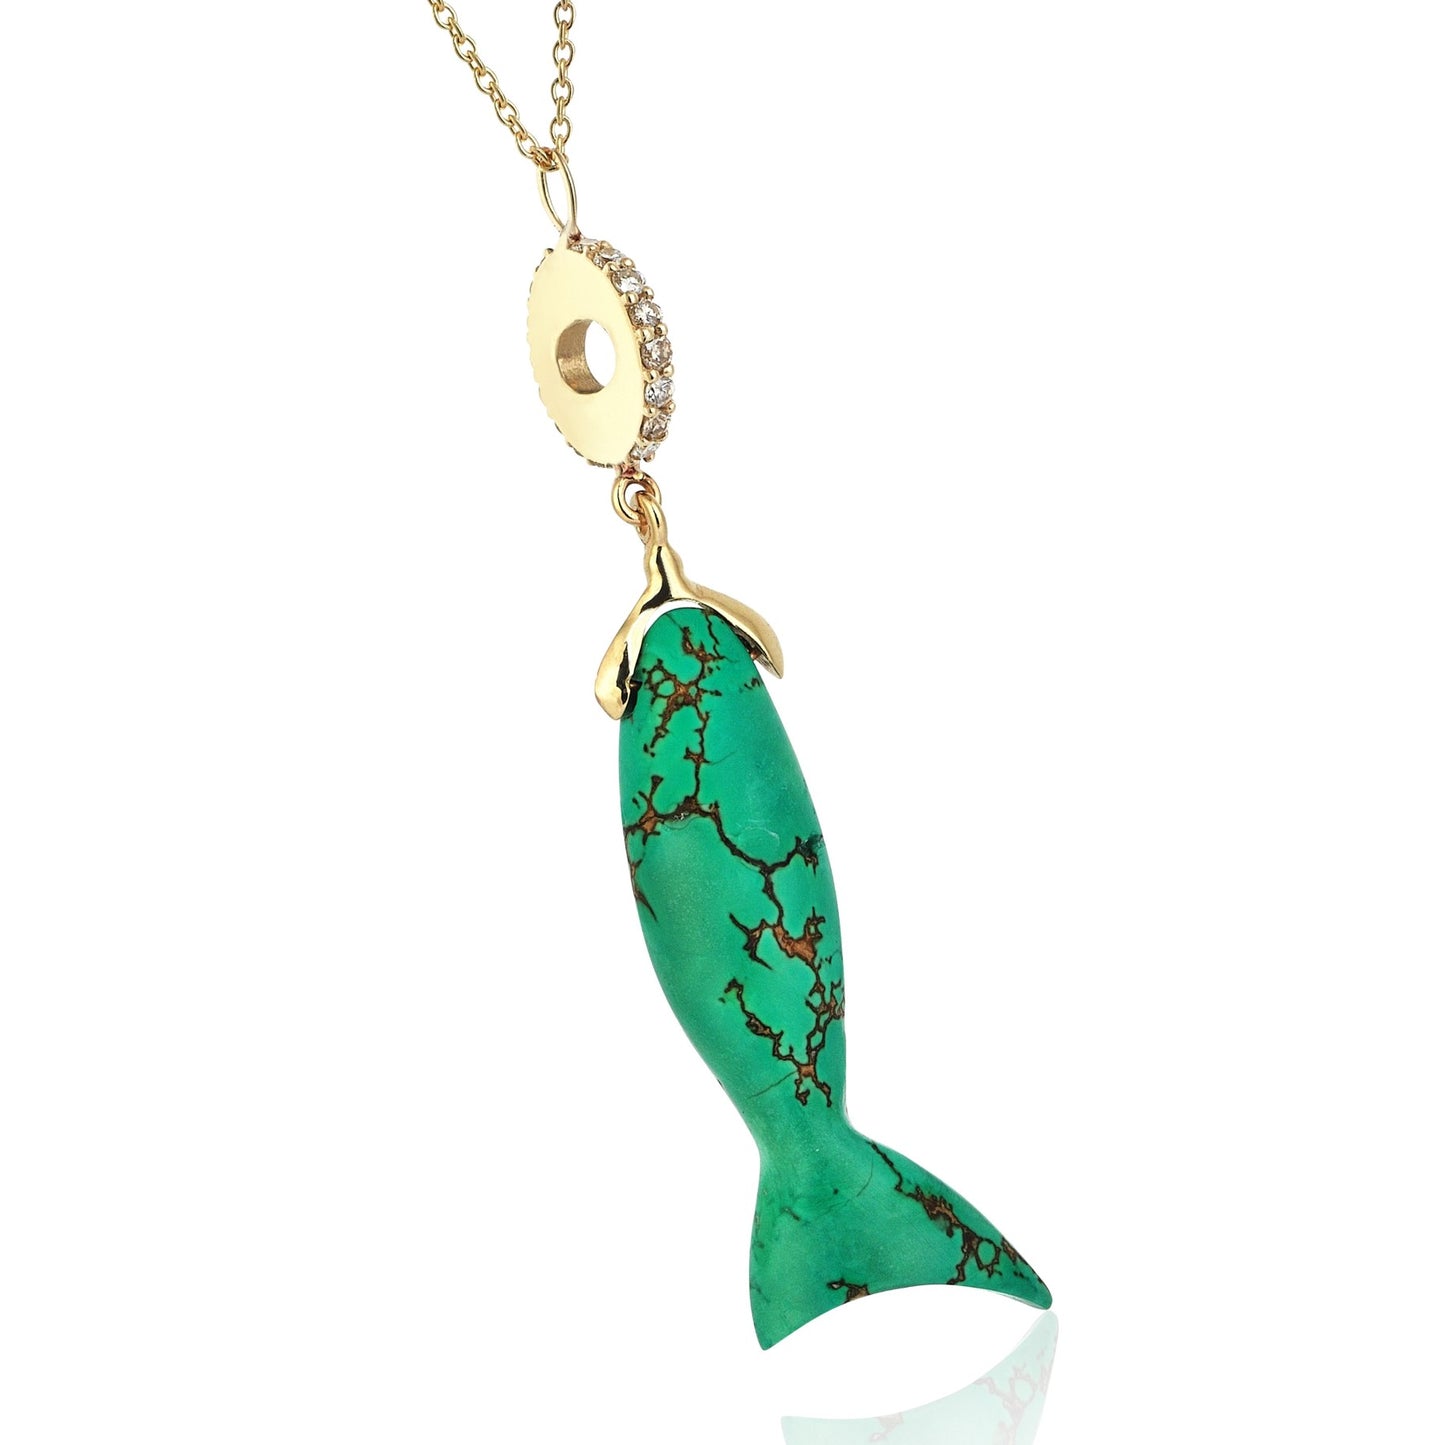 Turquoise Fish Necklace